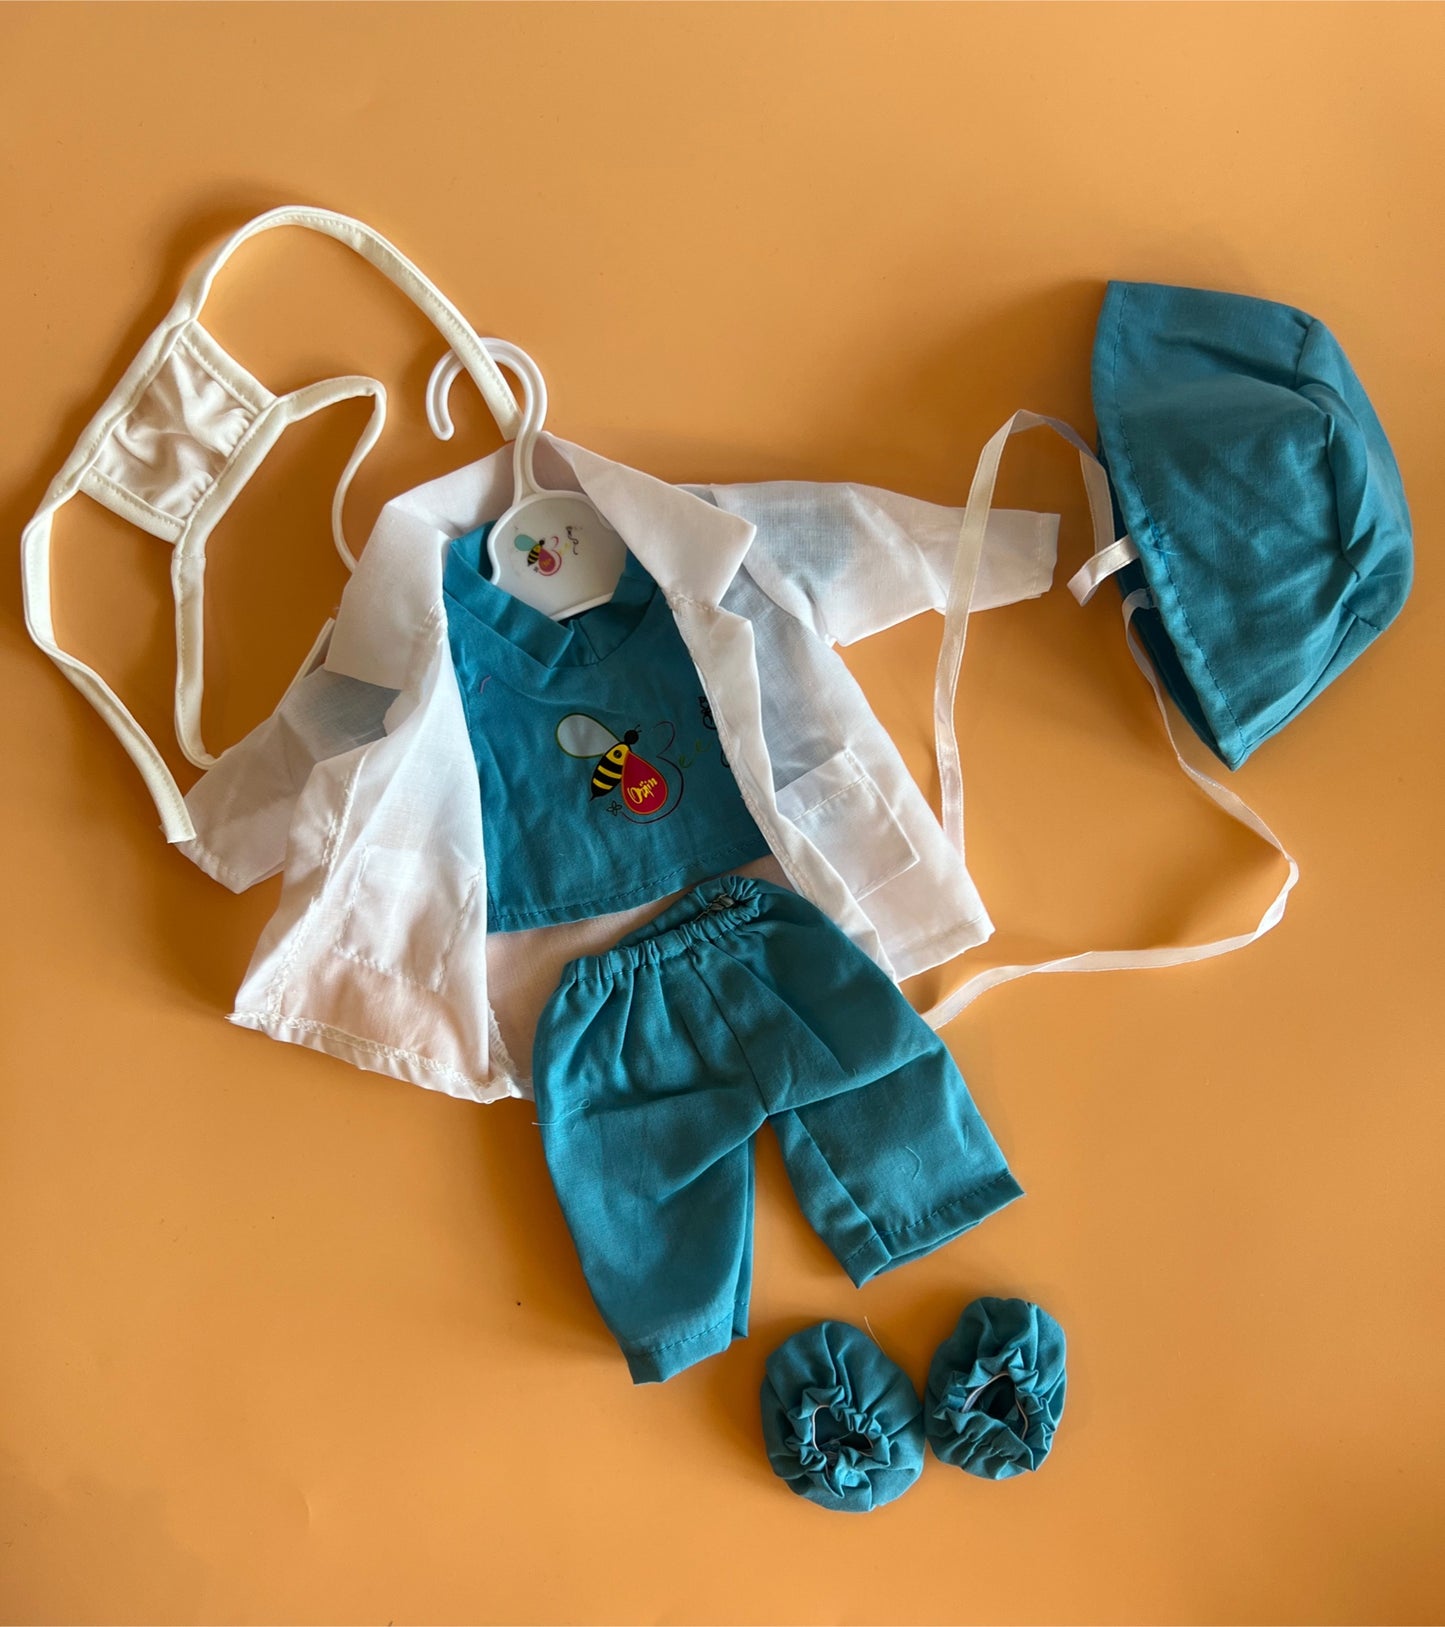 8 Piece Healthcare Hero Outfit (doll sold separately)